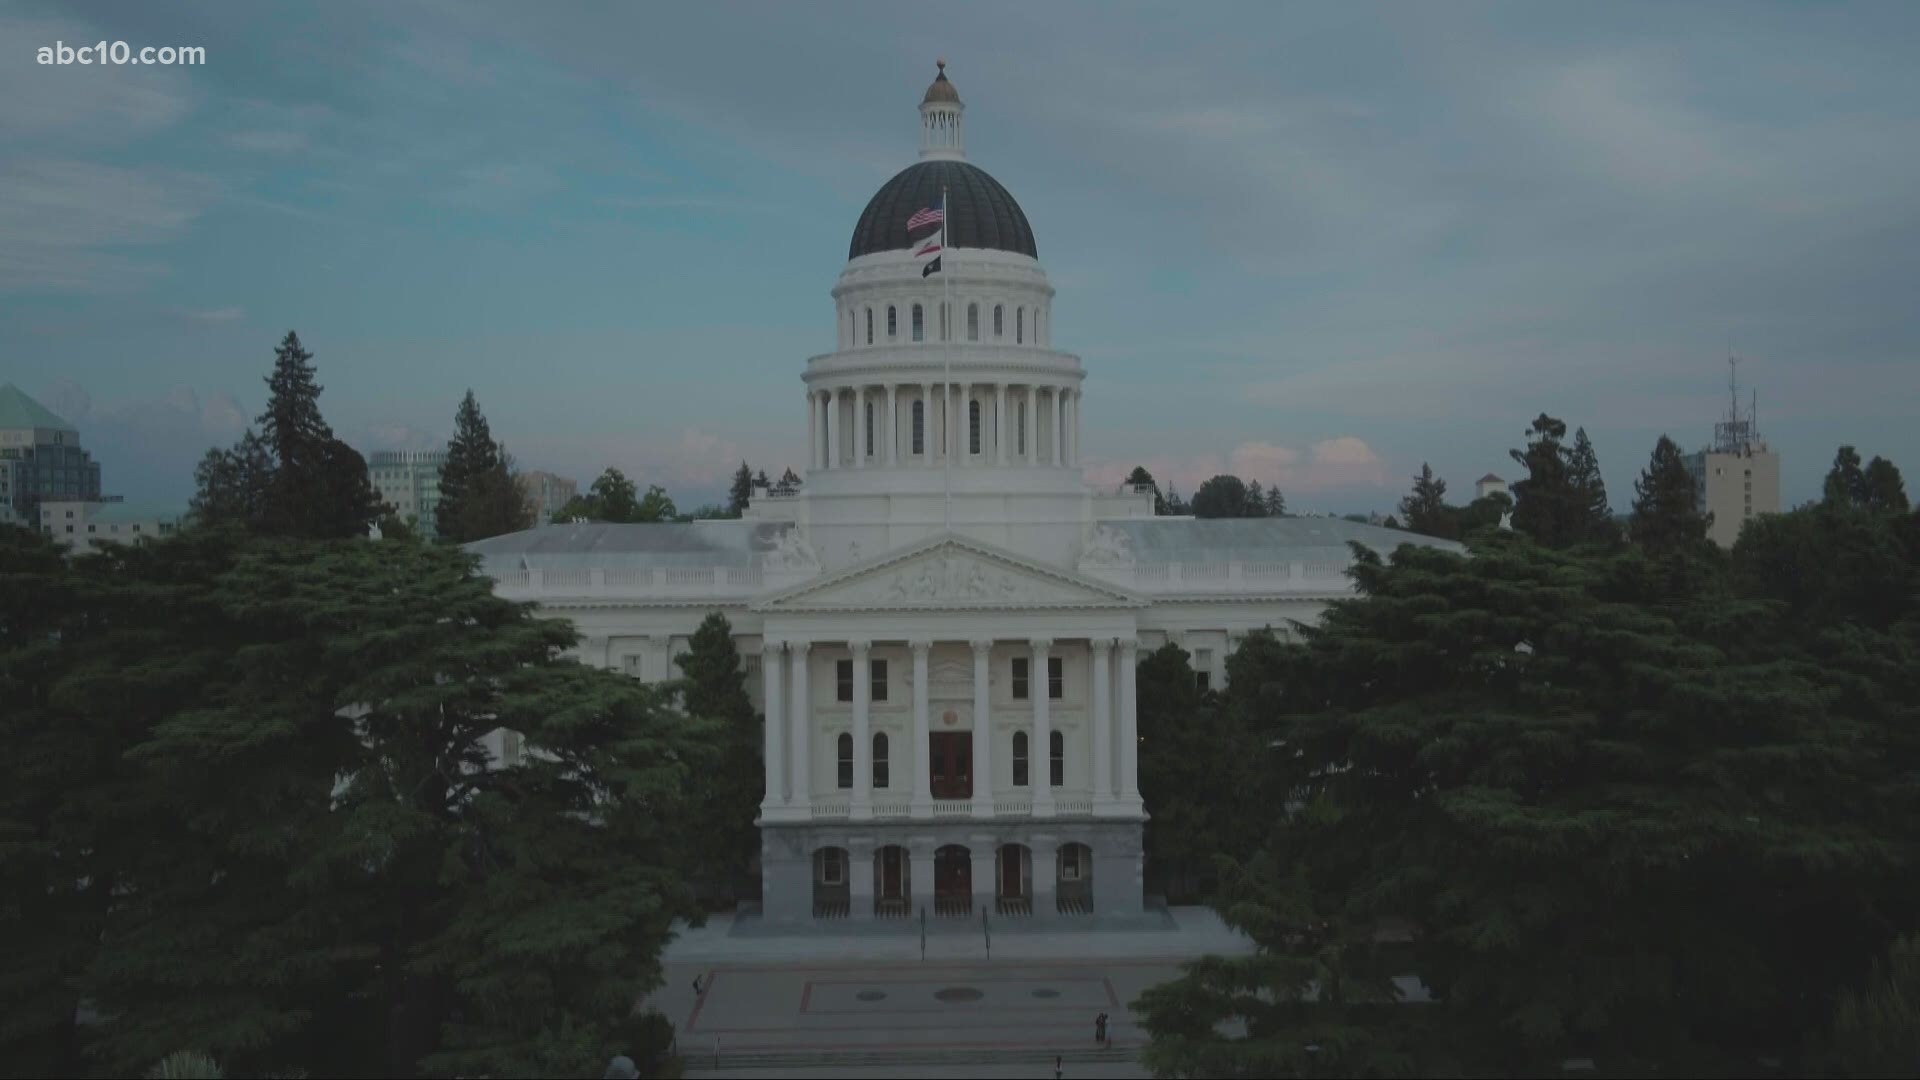 In 2019, Kiley introduced a bill that would require a special election in the event a congressional seat is vacated in California.